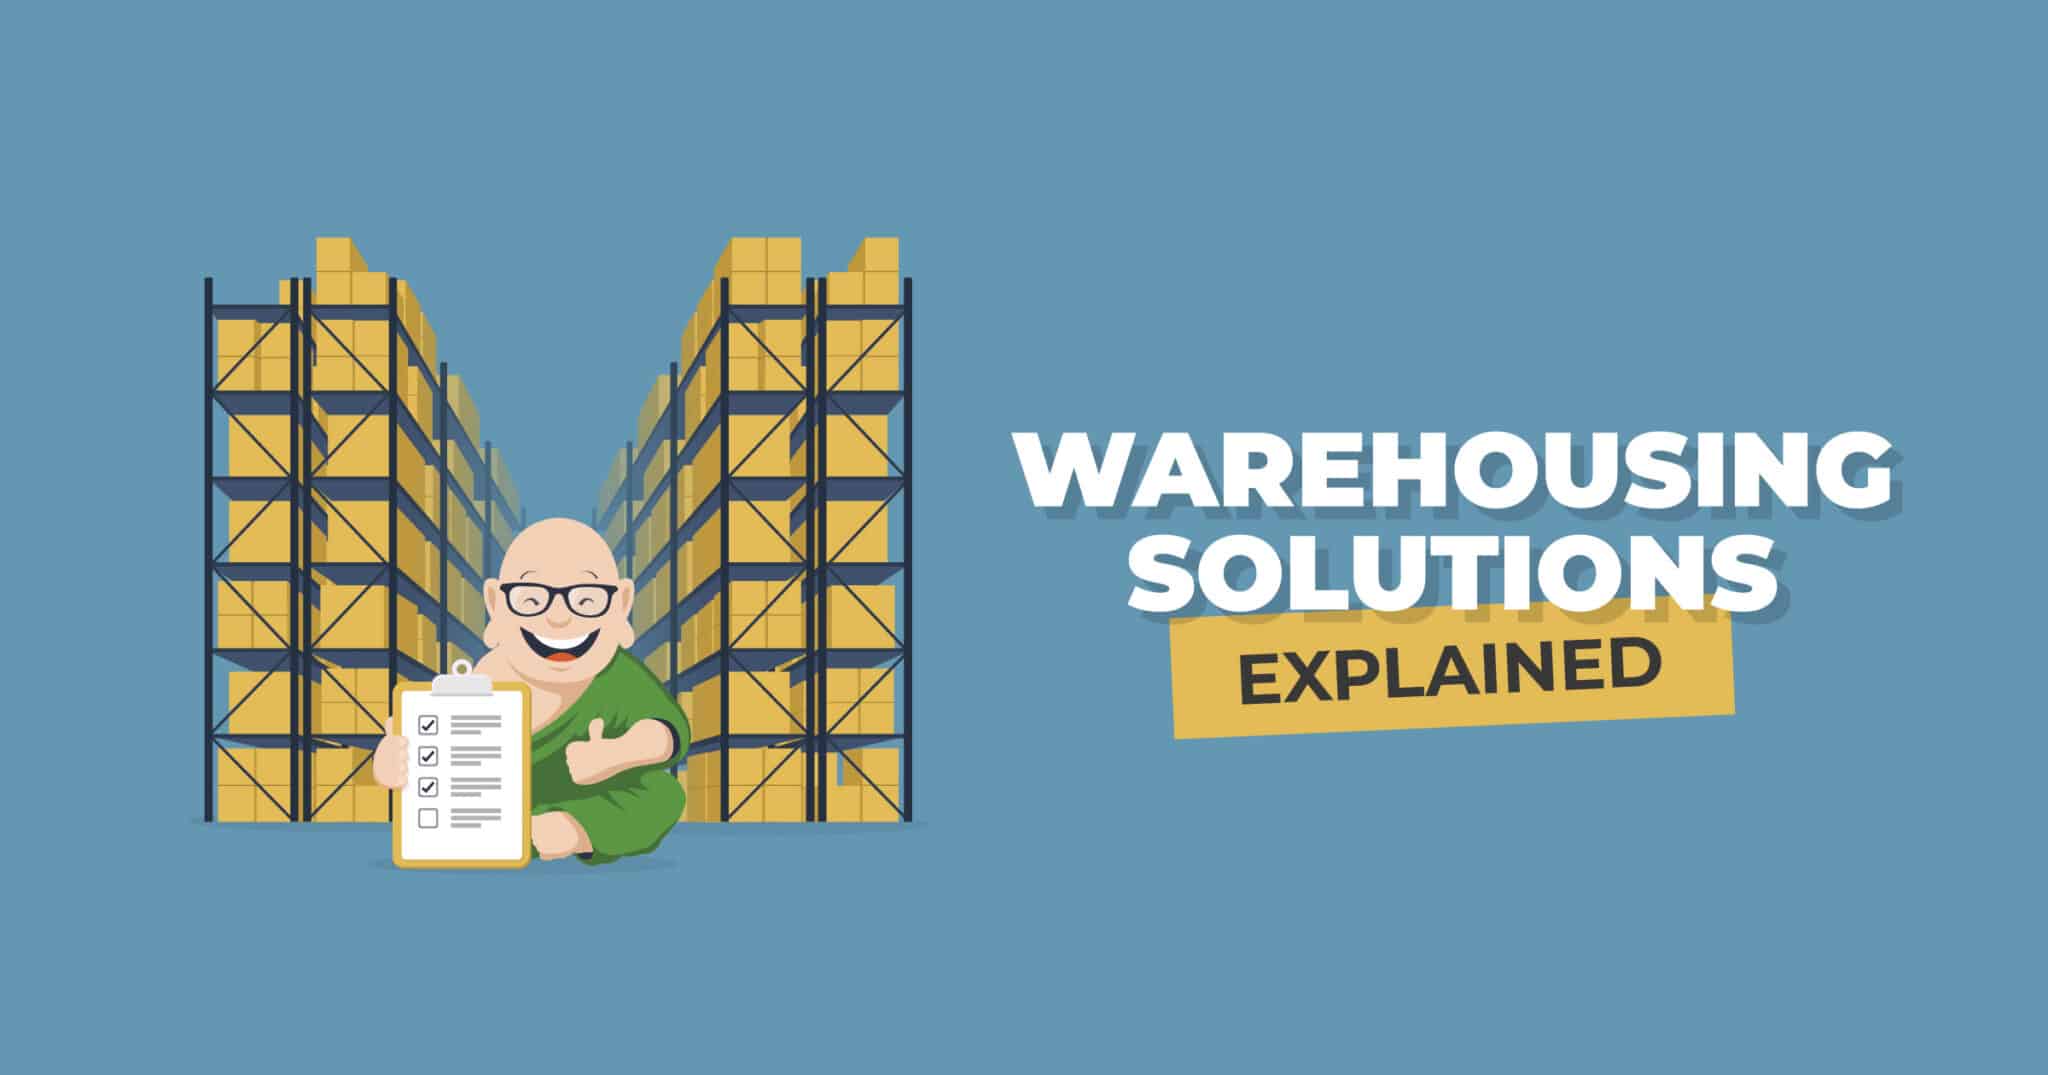 Warehousing Solutions Explained